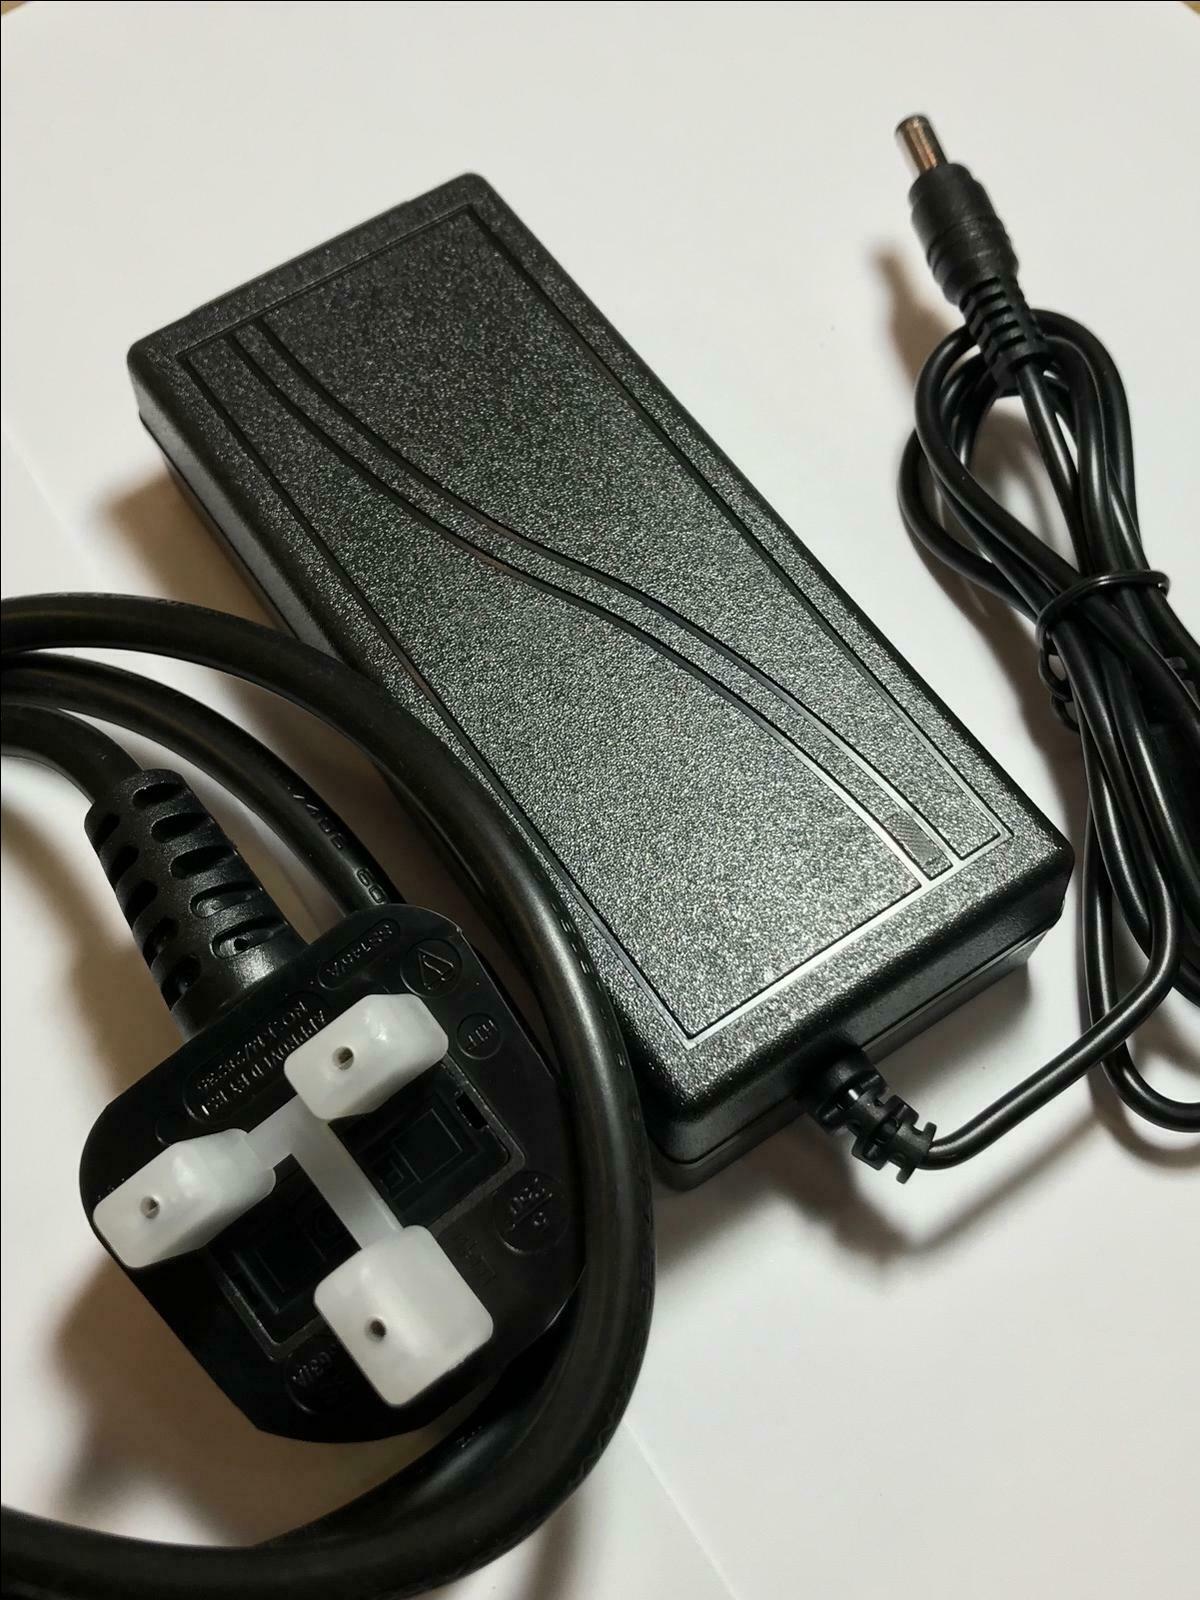 NEW 48V 1.3A AC adapter for Swann NHD-817 TELECAMERA 3.0MP